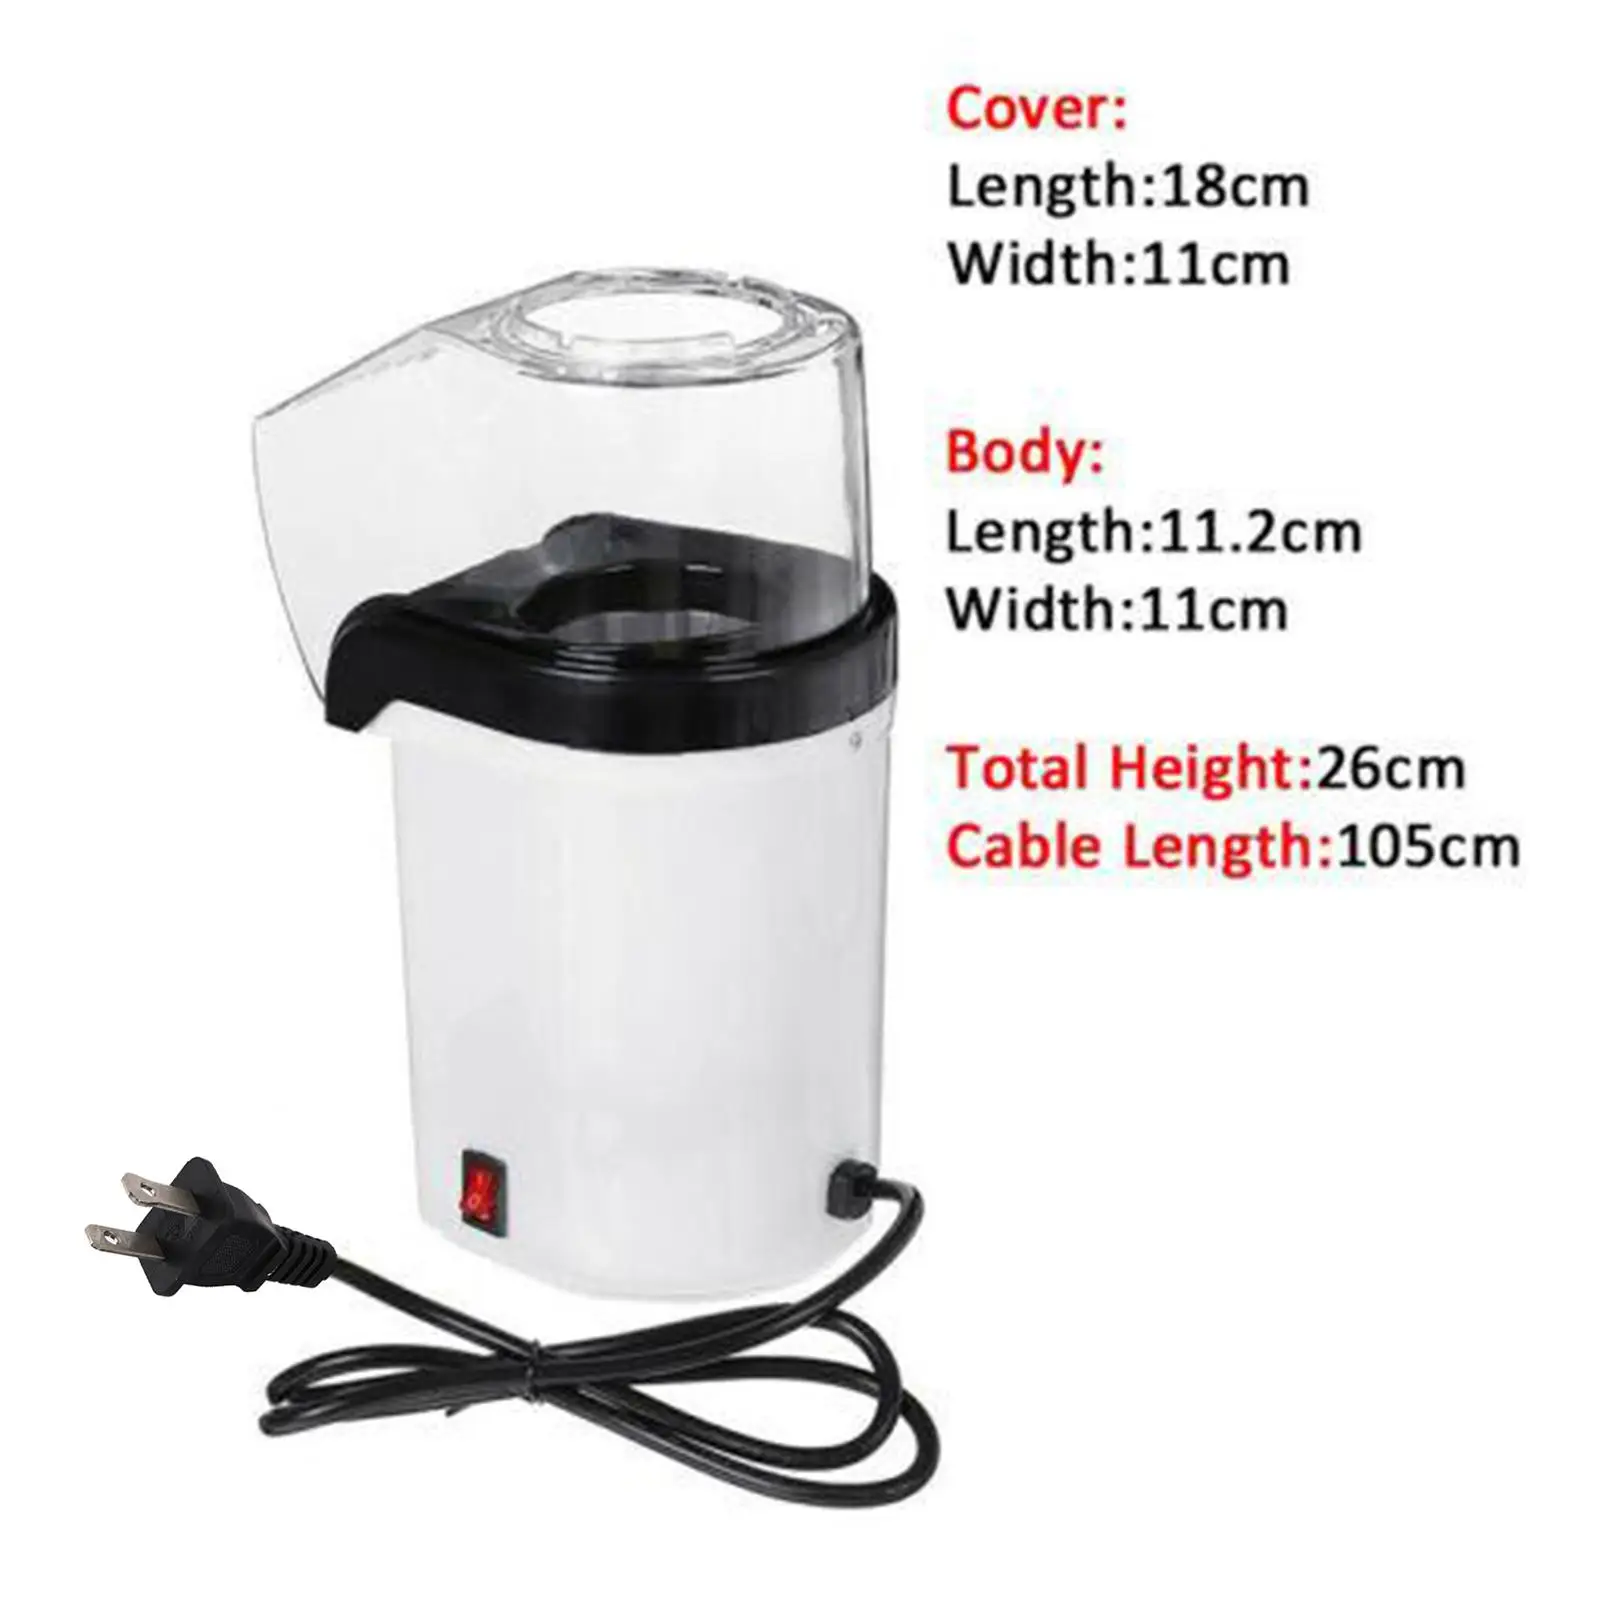 Automatic Hot Air Popcorn Machine Oil- for Family Party Kitchen Gadgets